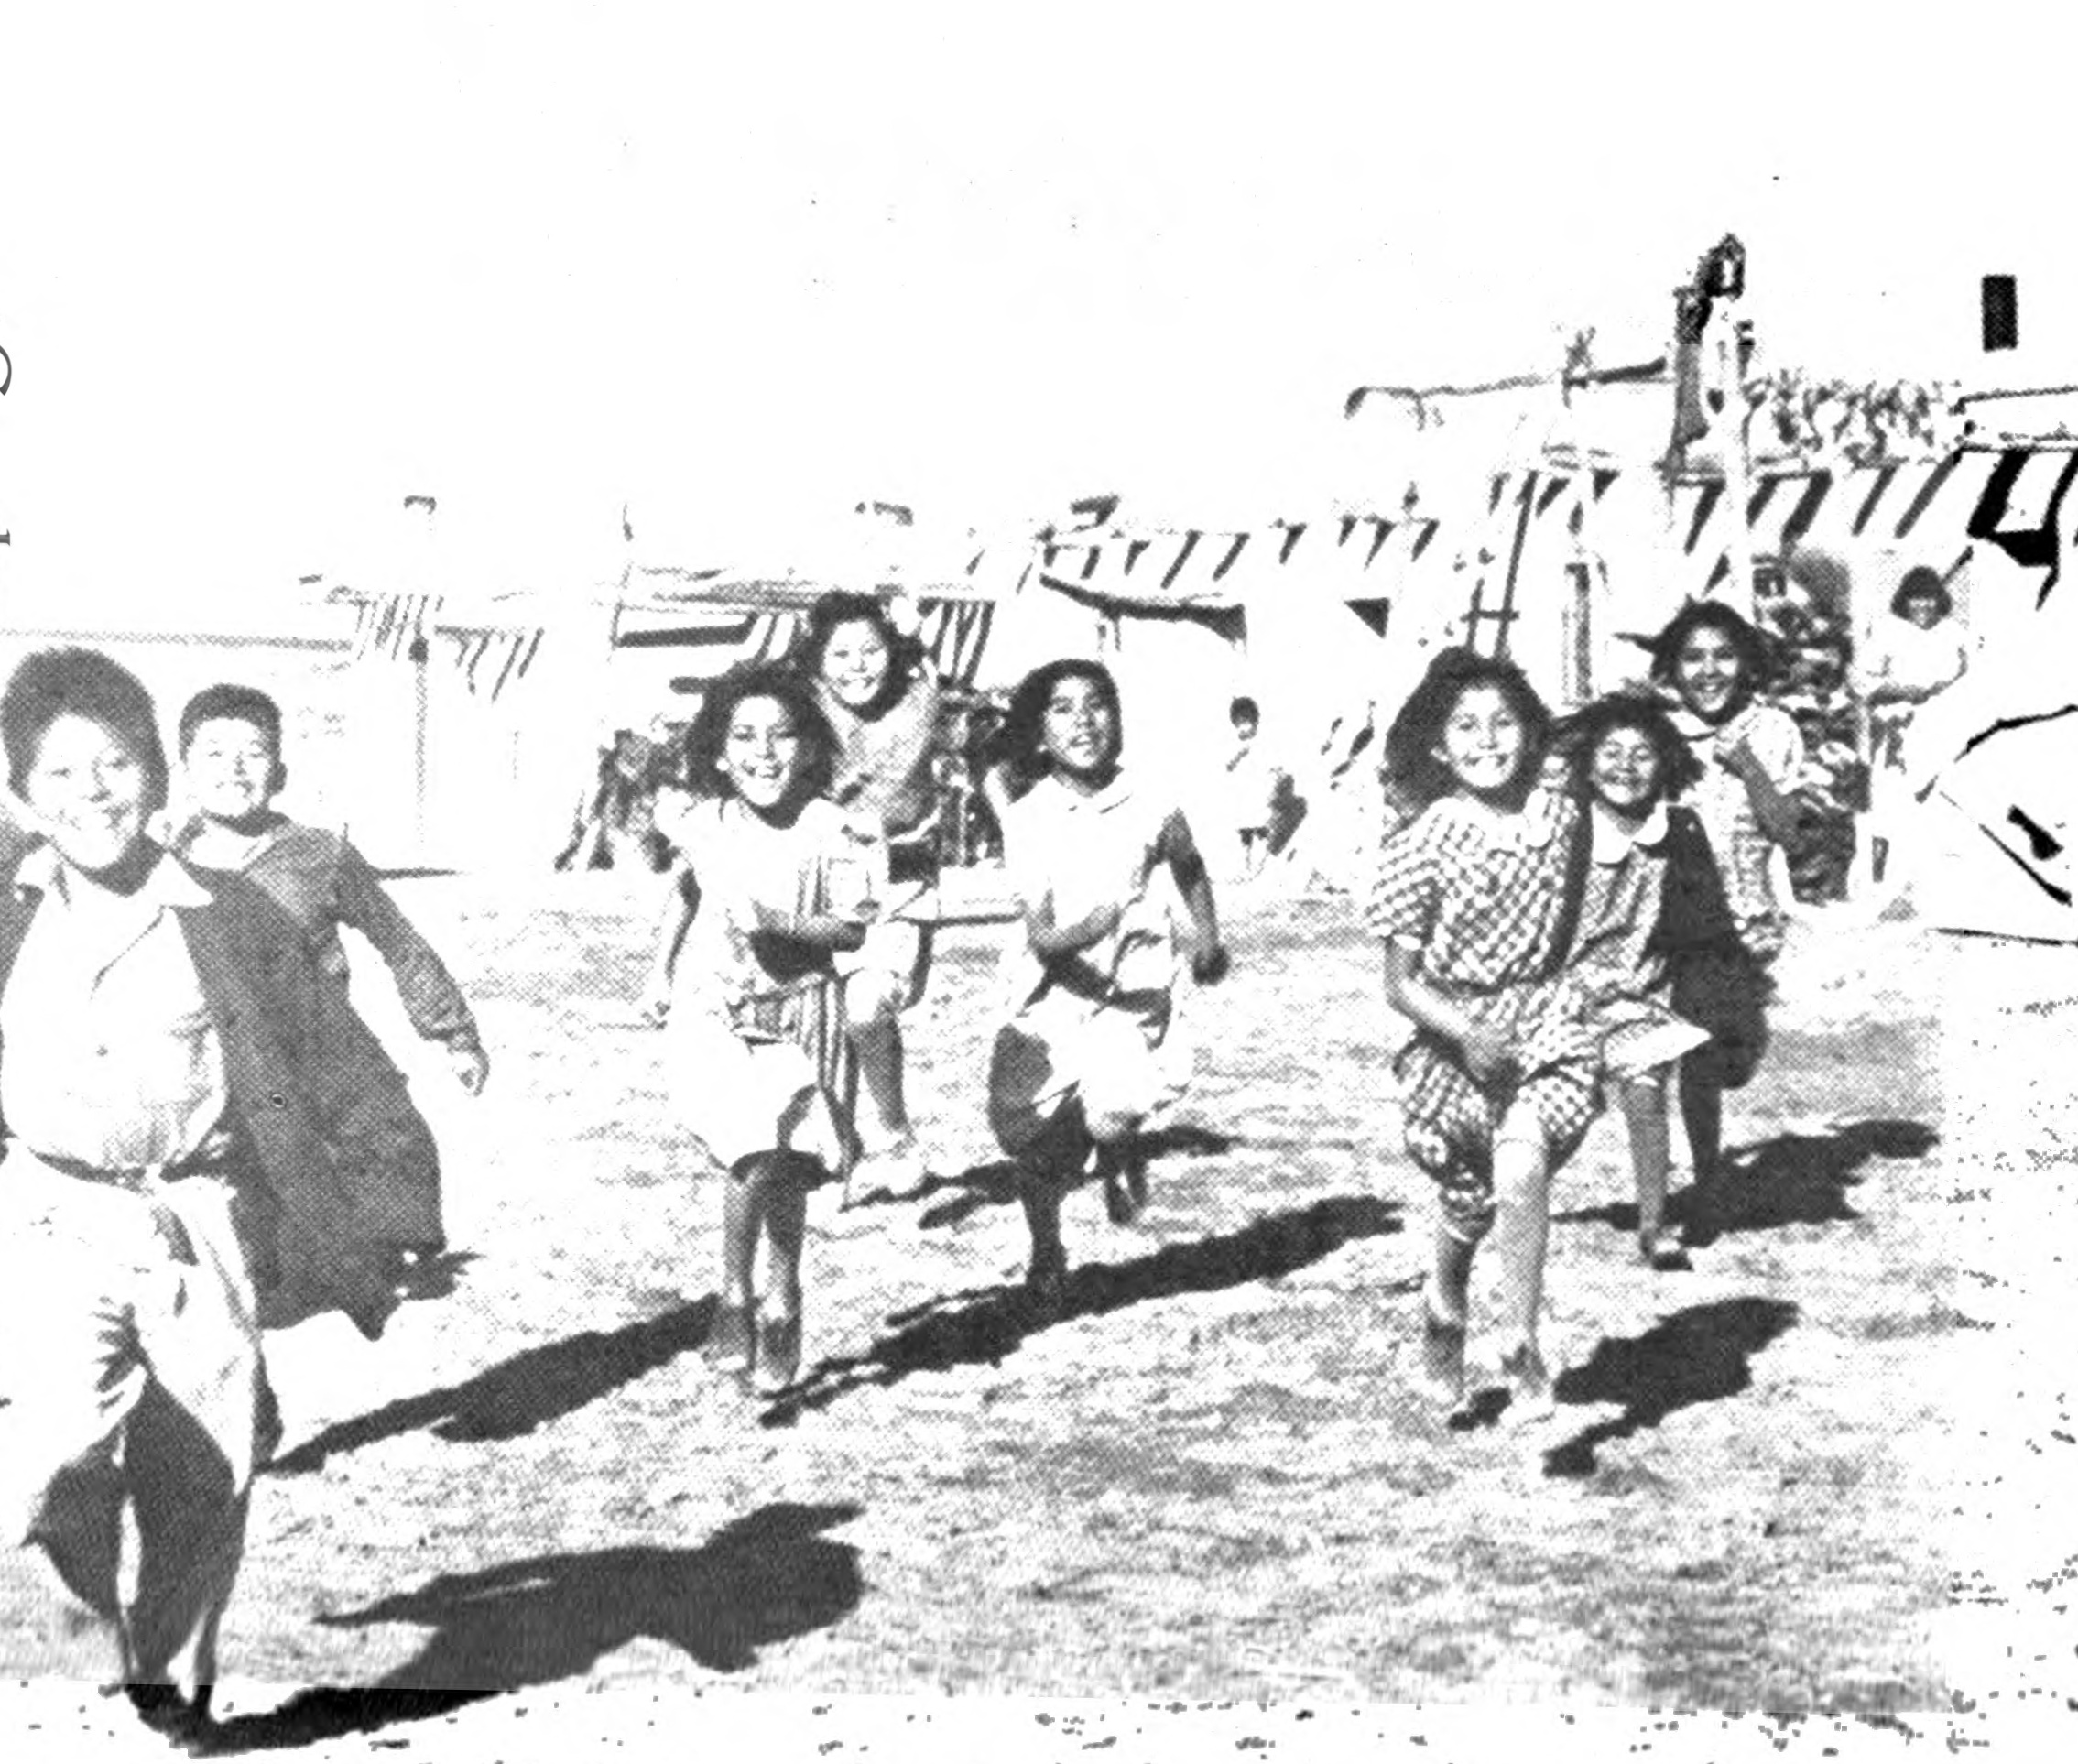 American Indian children playing. From Indians at Work, March 1940. U.S. Office of Indian Affairs